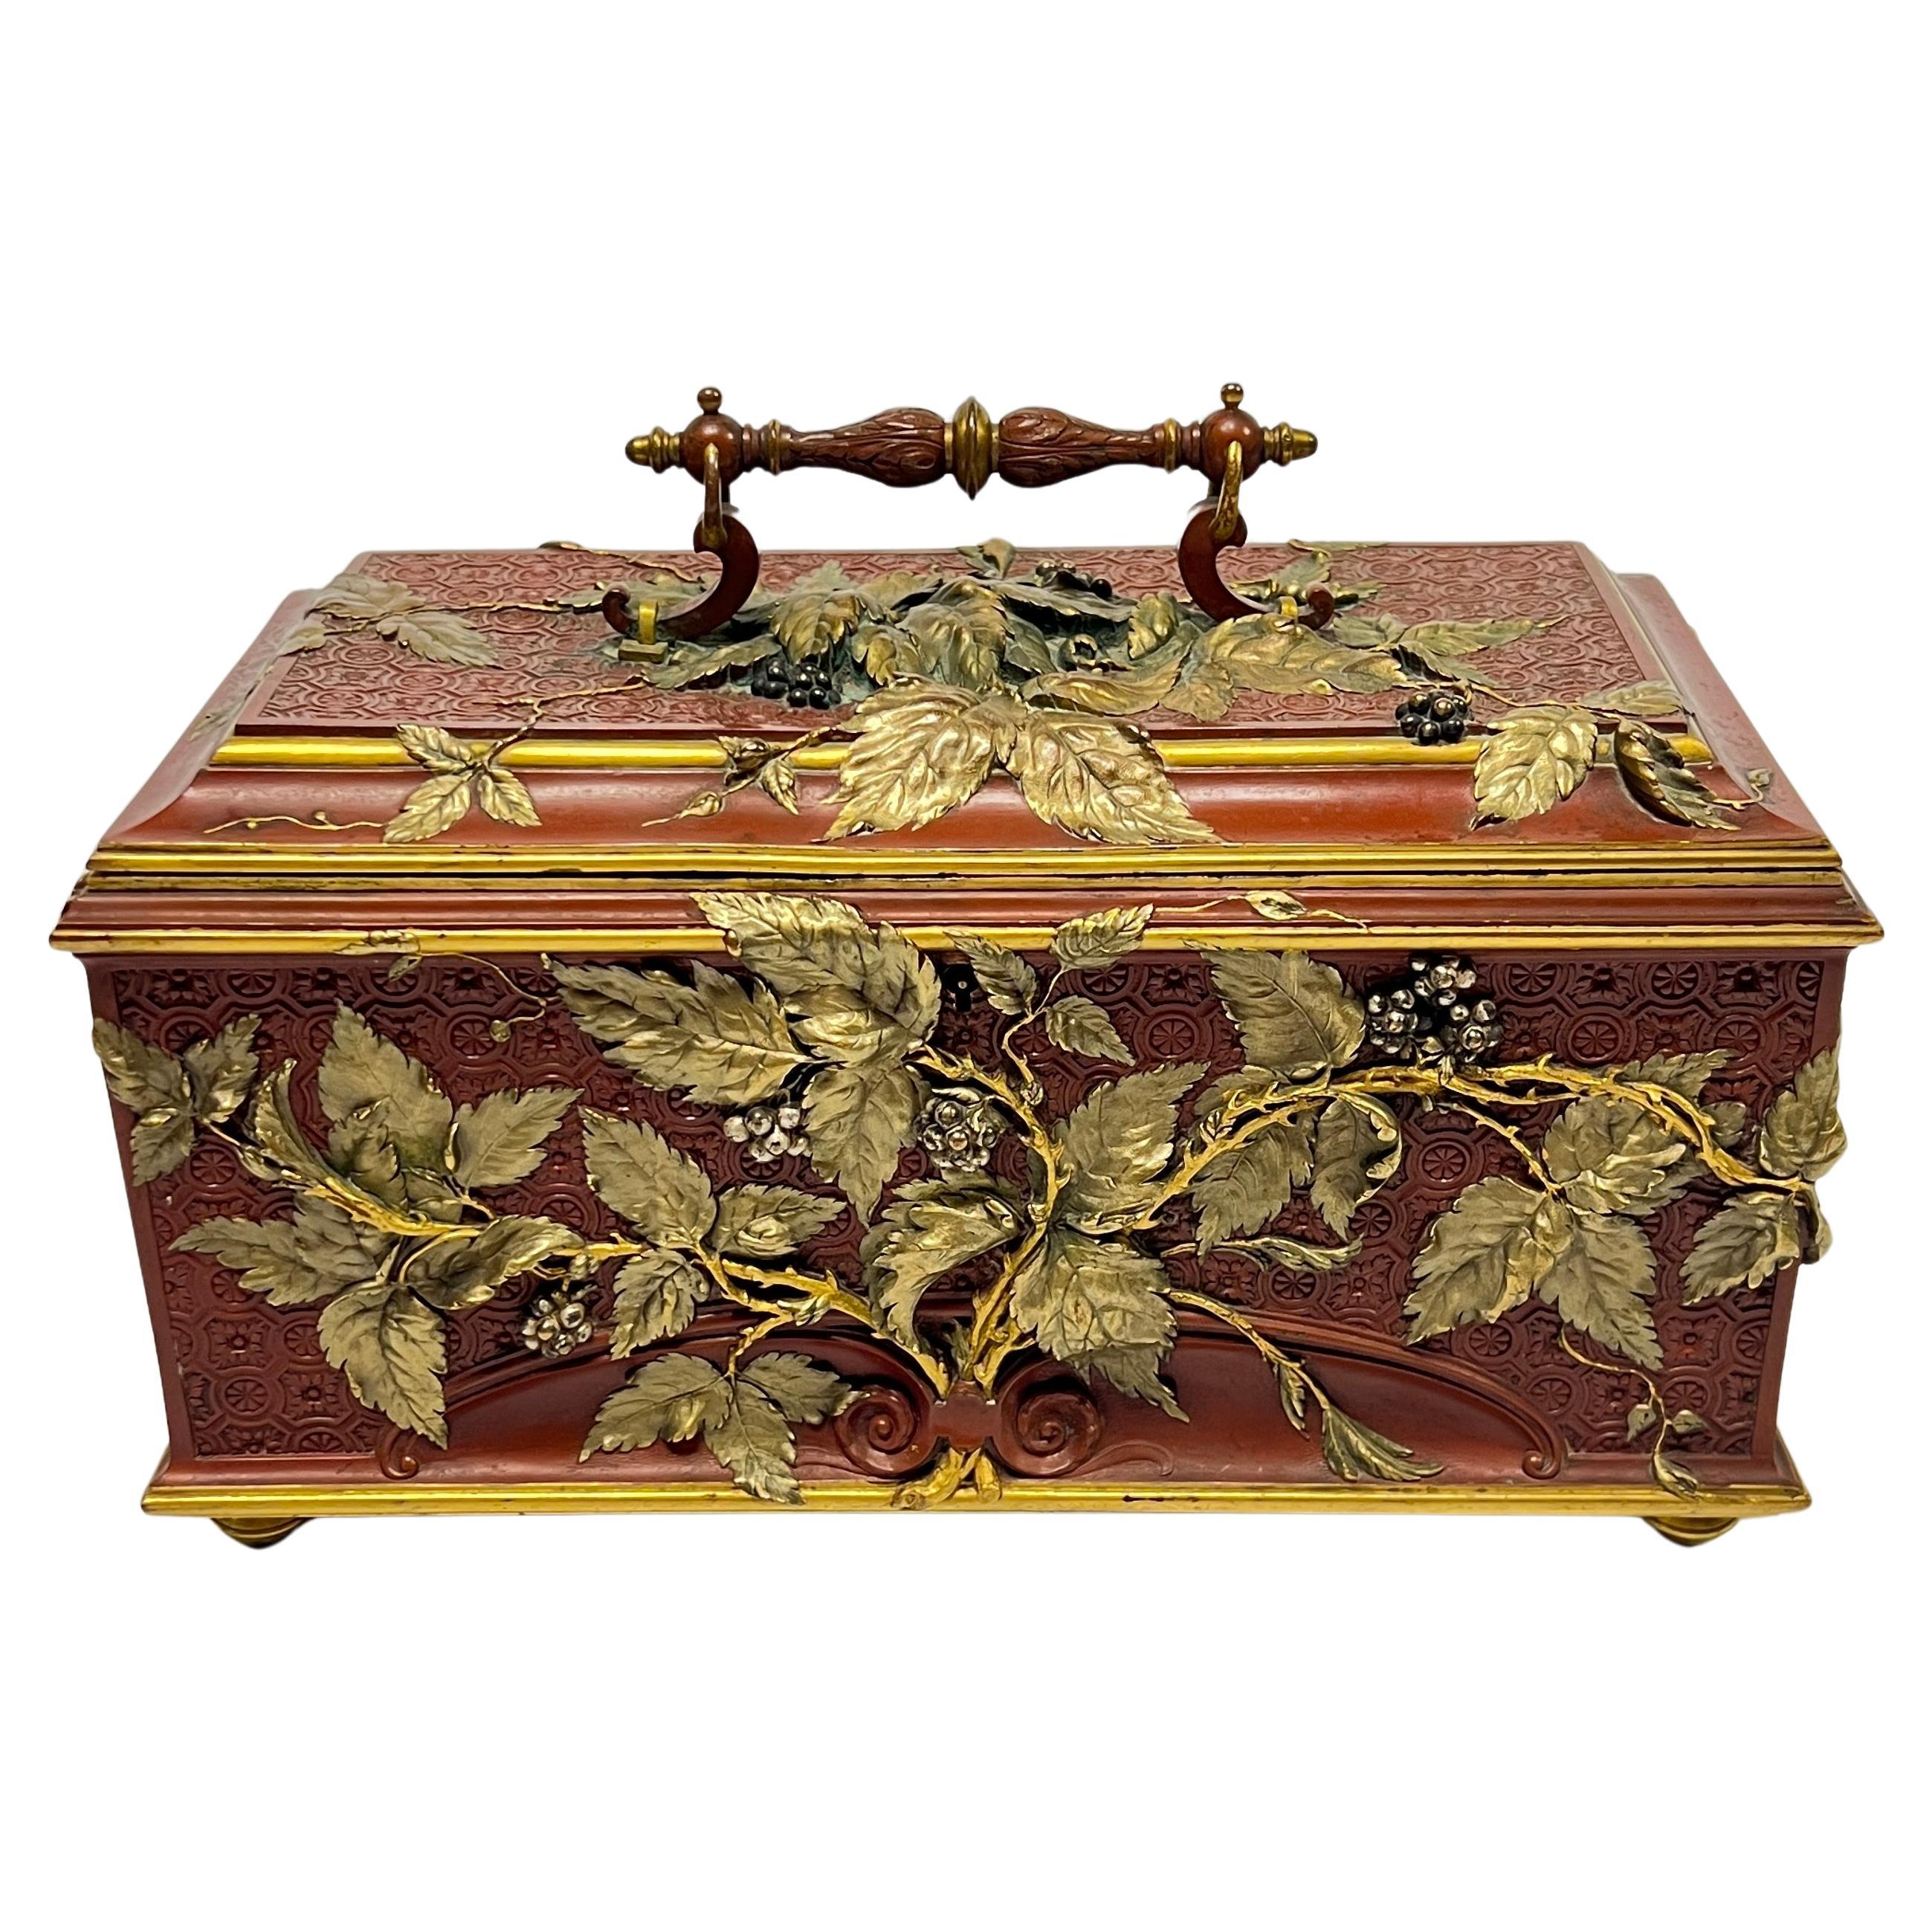  Emile-Auguste Reiber (French, 1826–1893) Gilt Patinated Casket Form Box